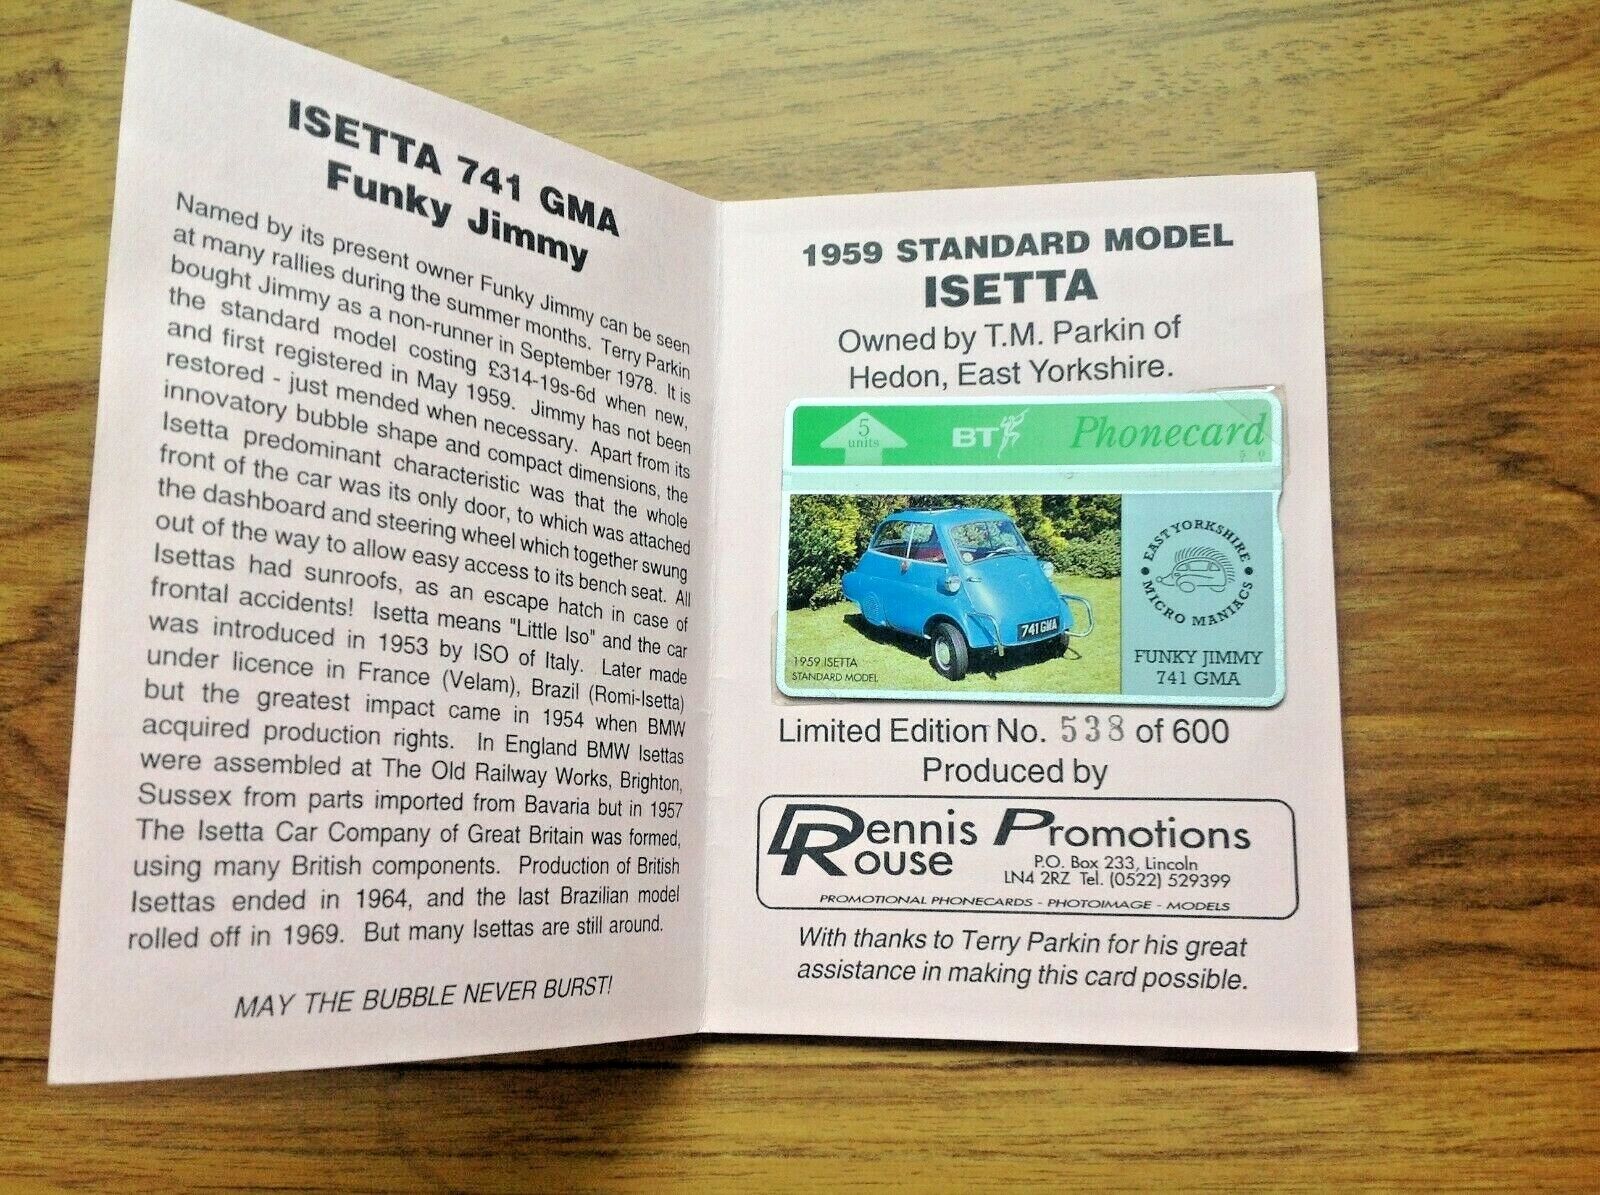  Isetta 741 GMA Funky Jimmy -  BT Phonecard With Card Wallet. Free UK P&P